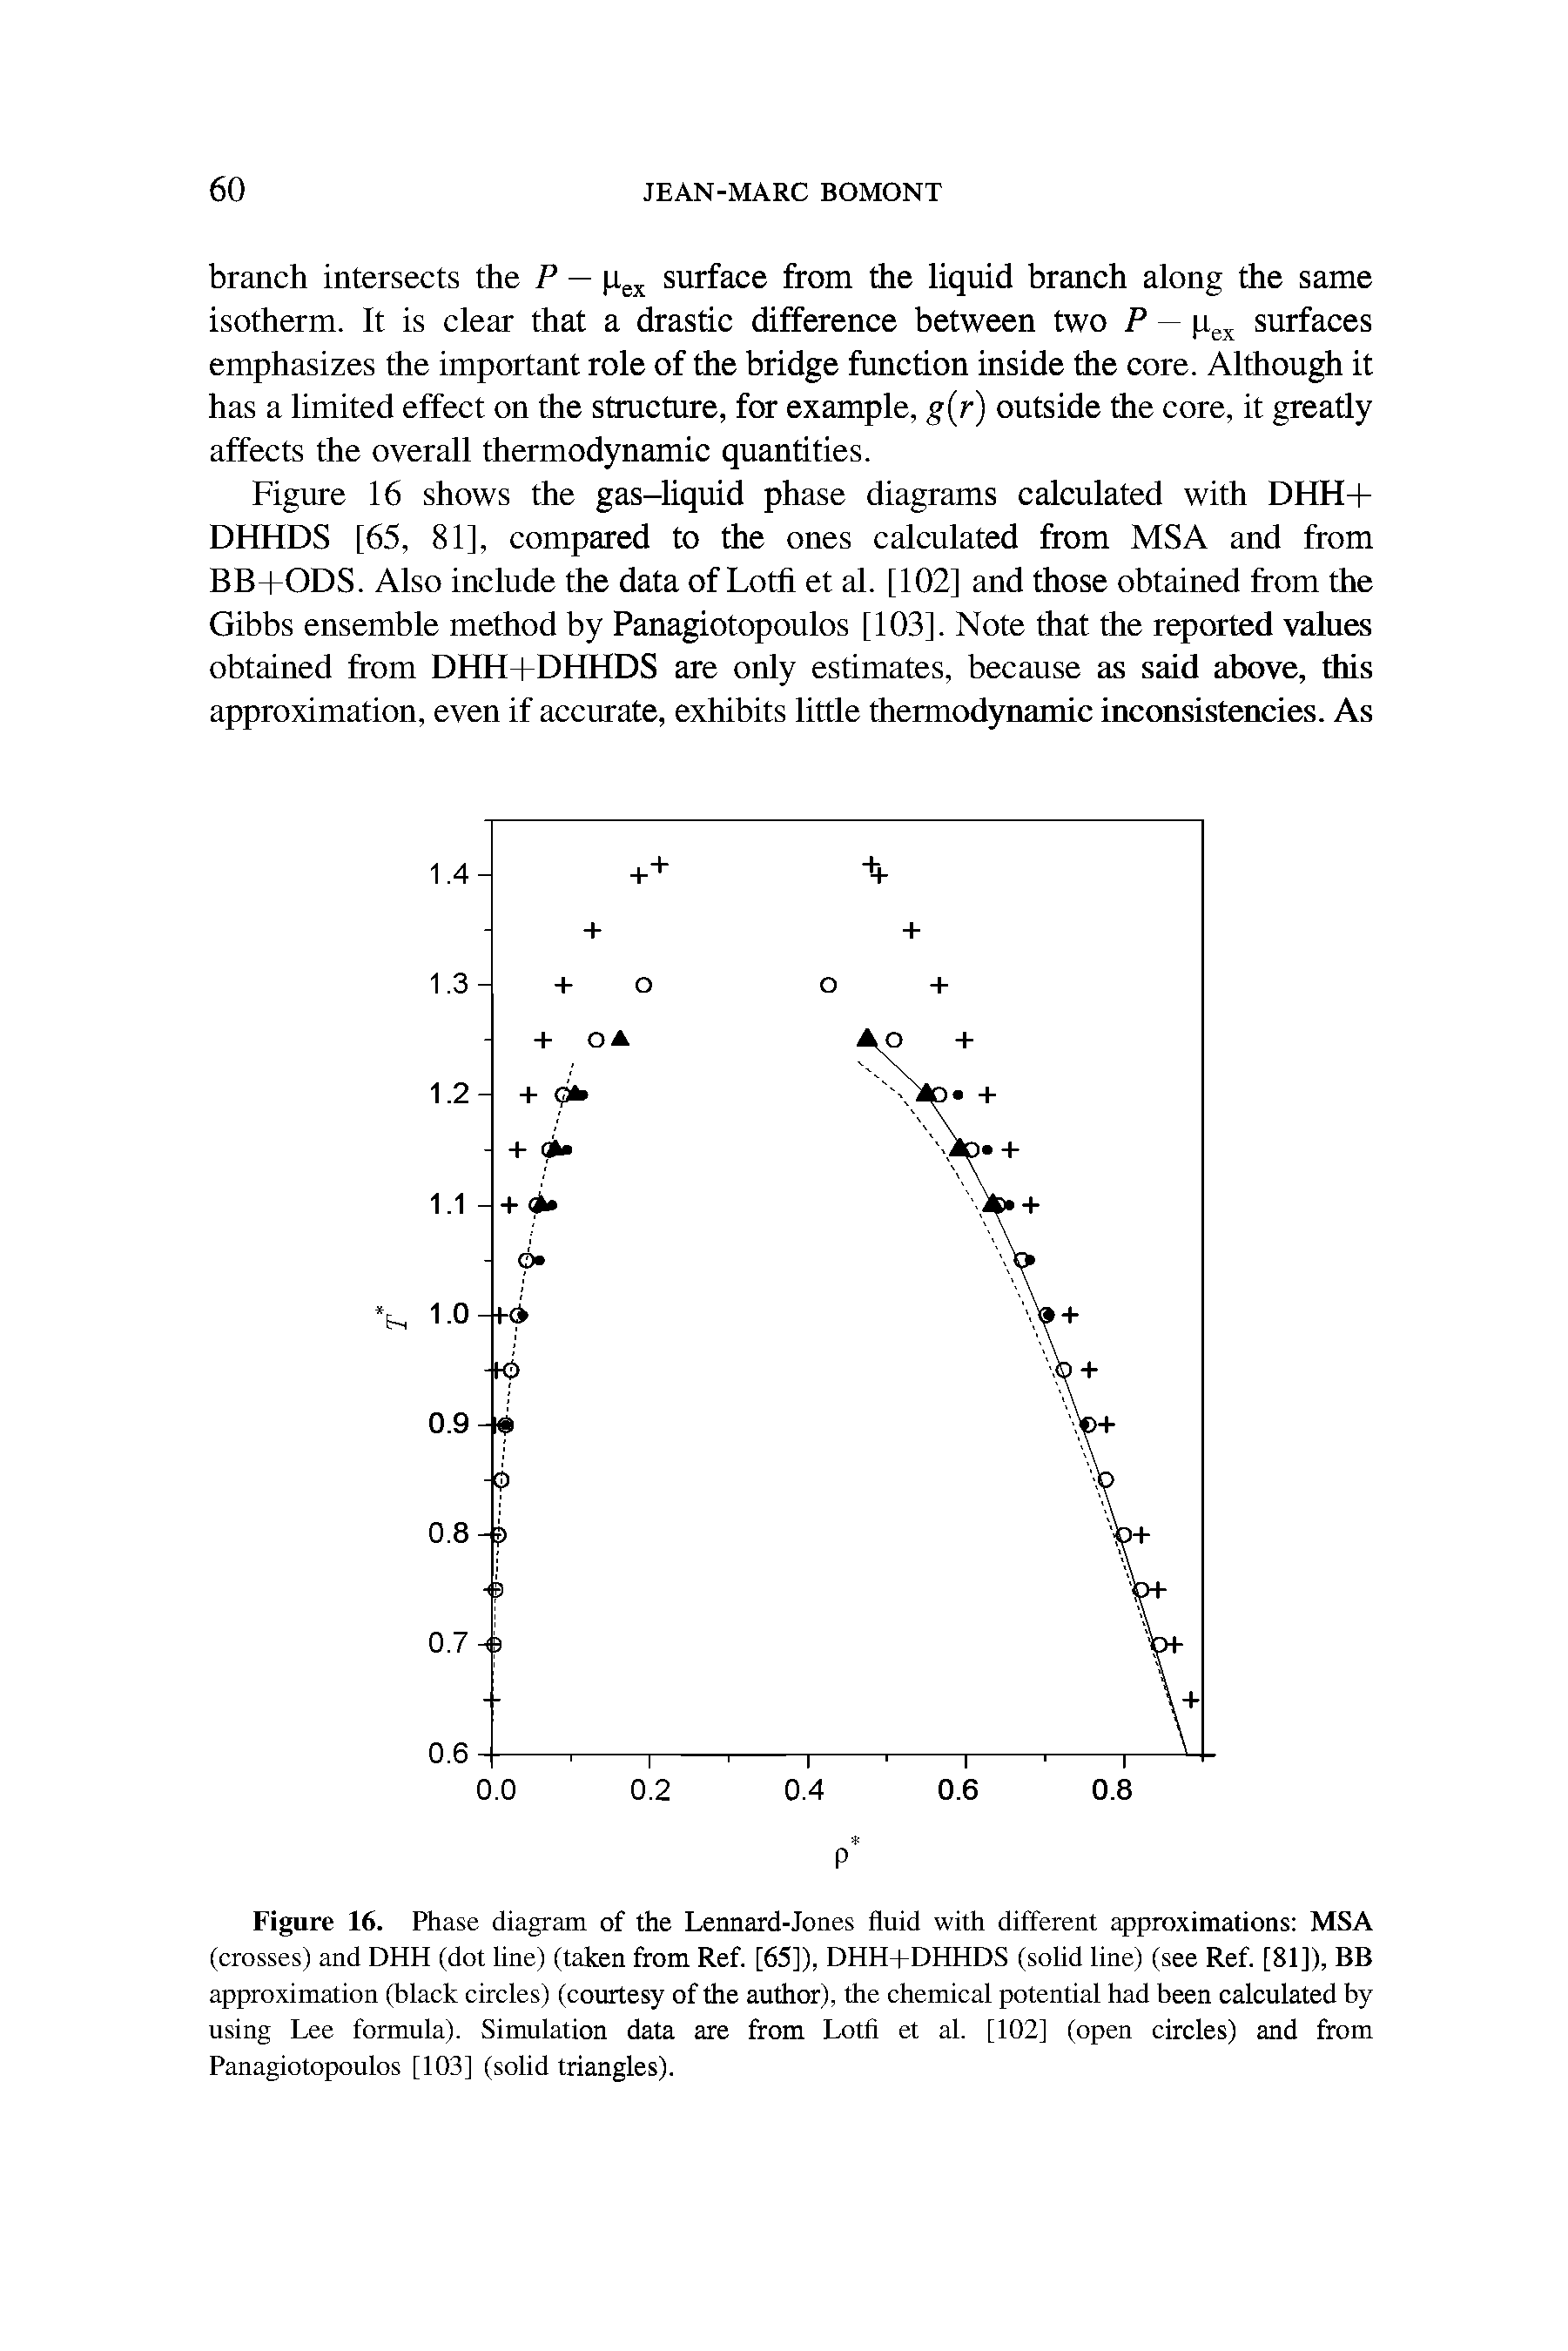 Figure 16. Phase diagram of the Lennard-Jones fluid with different approximations MSA (crosses) and DHH (dot line) (taken from Ref. [65]), DHH+DHHDS (solid line) (see Ref. [81]), BB approximation (black circles) (courtesy of the author), the chemical potential had been calculated by using Lee formula). Simulation data are from Lotfi et al. [102] (open circles) and from Panagiotopoulos [103] (solid triangles).